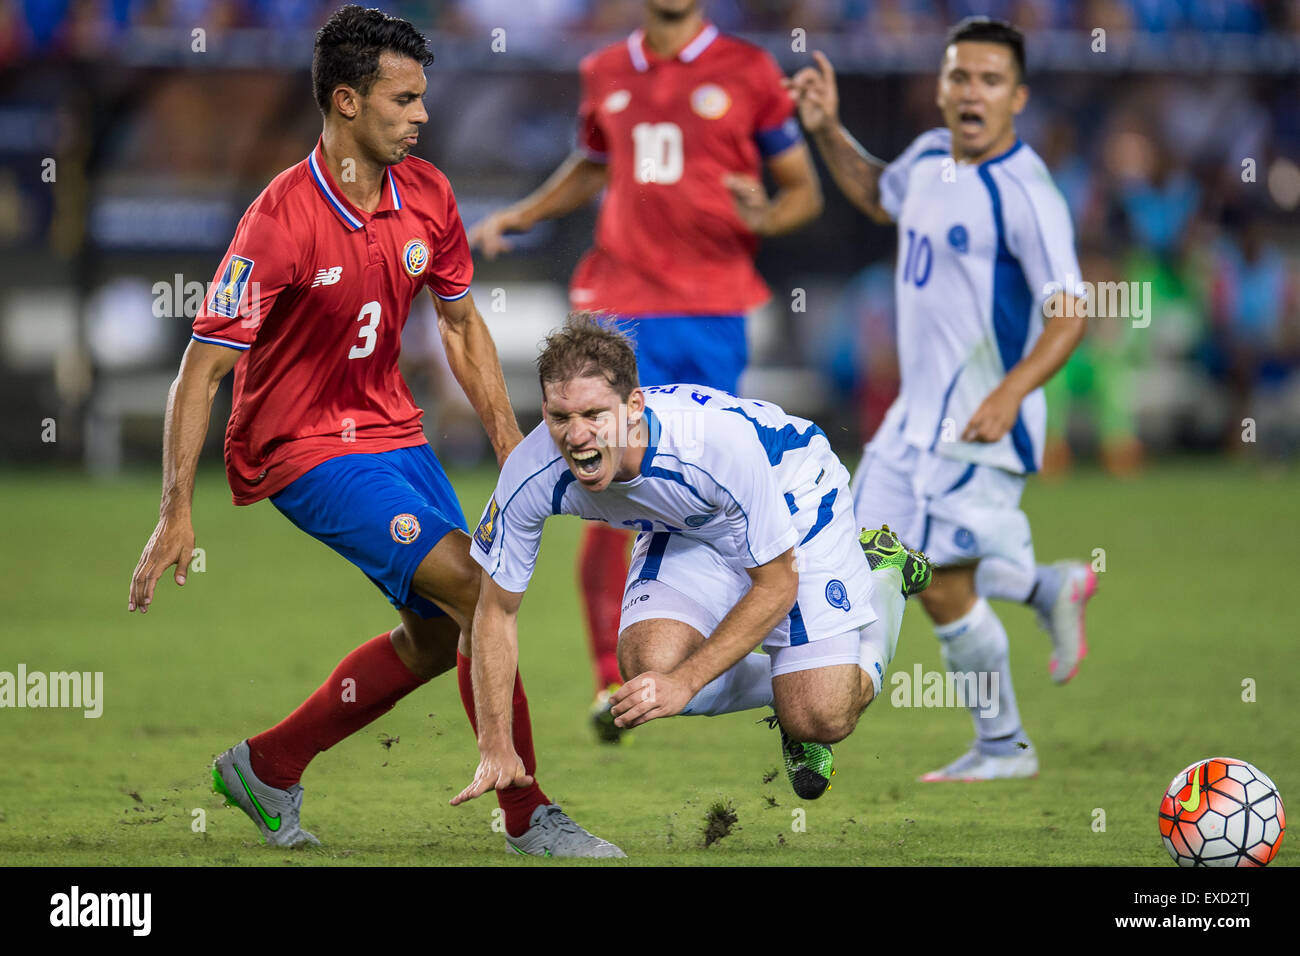 July 11, 2015: El Salvador midfielder Pablo Punyed (20) gets fouled by Costa Rica defender Giancarlo Gonzalez (3) during the 2nd half of an international CONCACAF Gold Cup soccer match between Costa Rica and El Salvador at BBVA Compass Stadium in Houston, TX. The game ended in a 1-1 draw. Credit:  Cal Sport Media/Alamy Live News Stock Photo